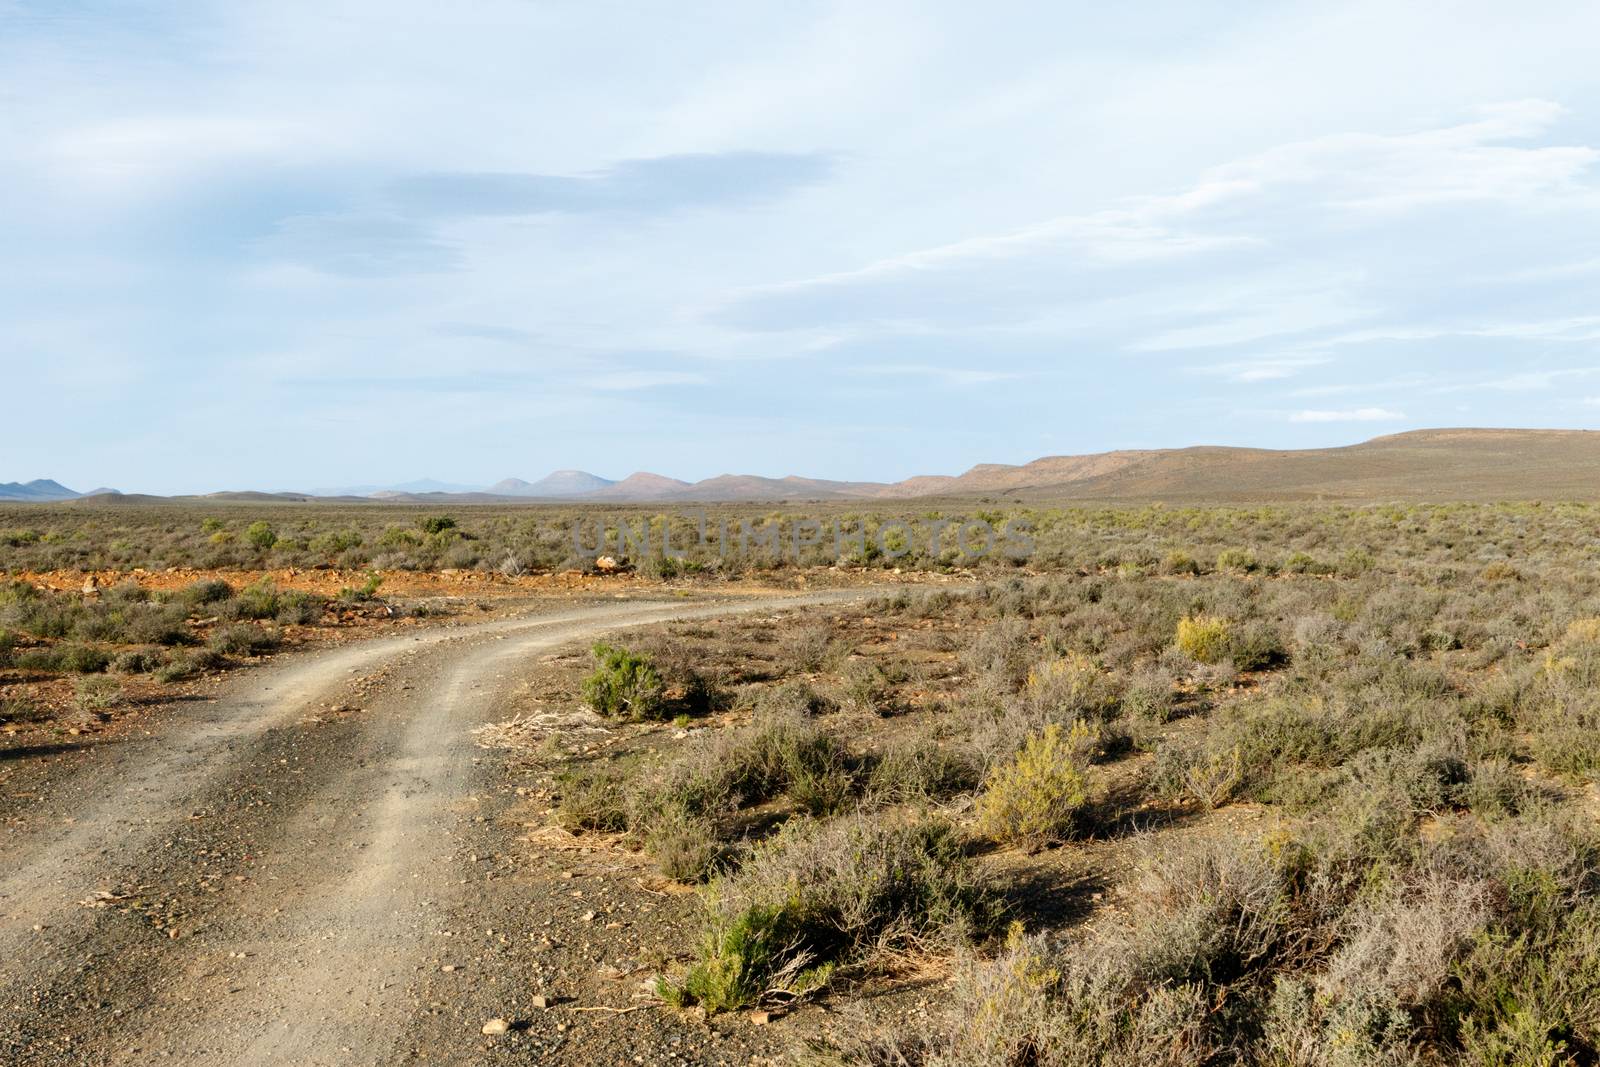 The Road - Sutherland is a town with about 2,841 inhabitants in the Northern Cape province of South Africa. It lies in the western Roggeveld Mountains in the Karoo